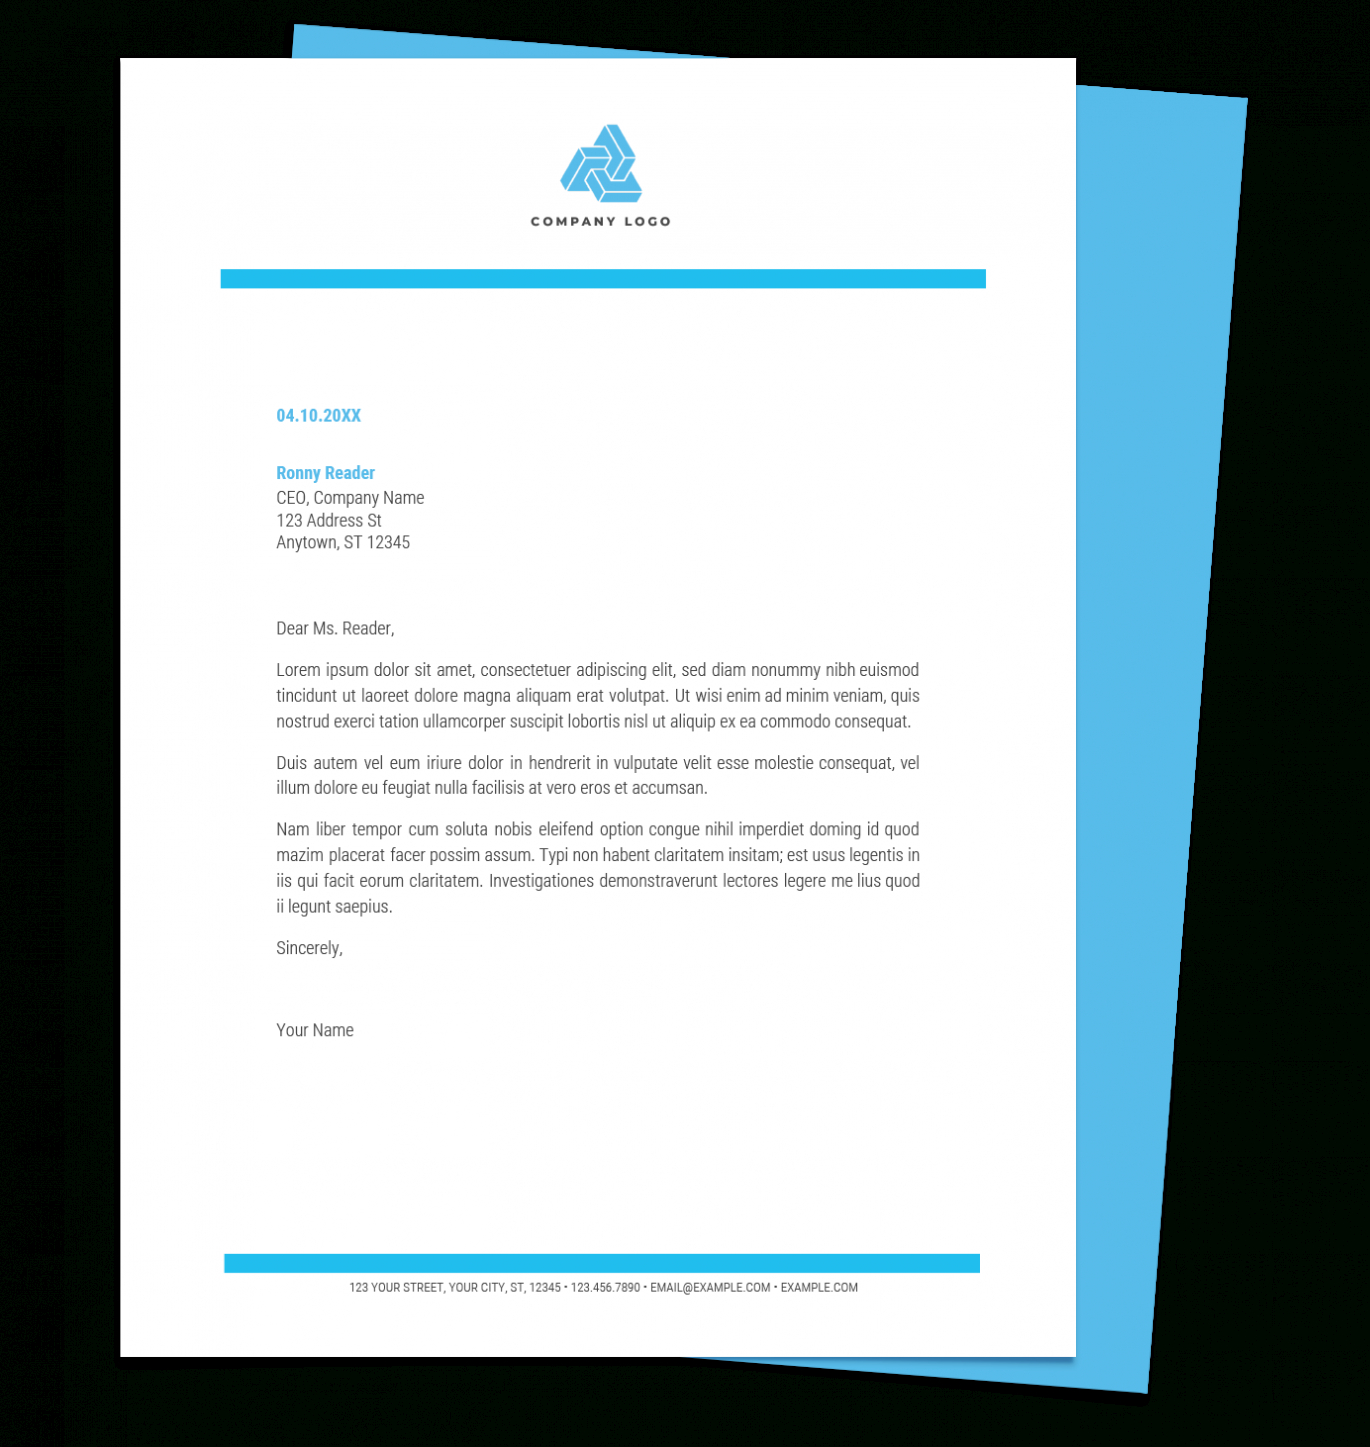 Free Letterhead Templates For Google Docs And Word intended for Google Letterhead Templates